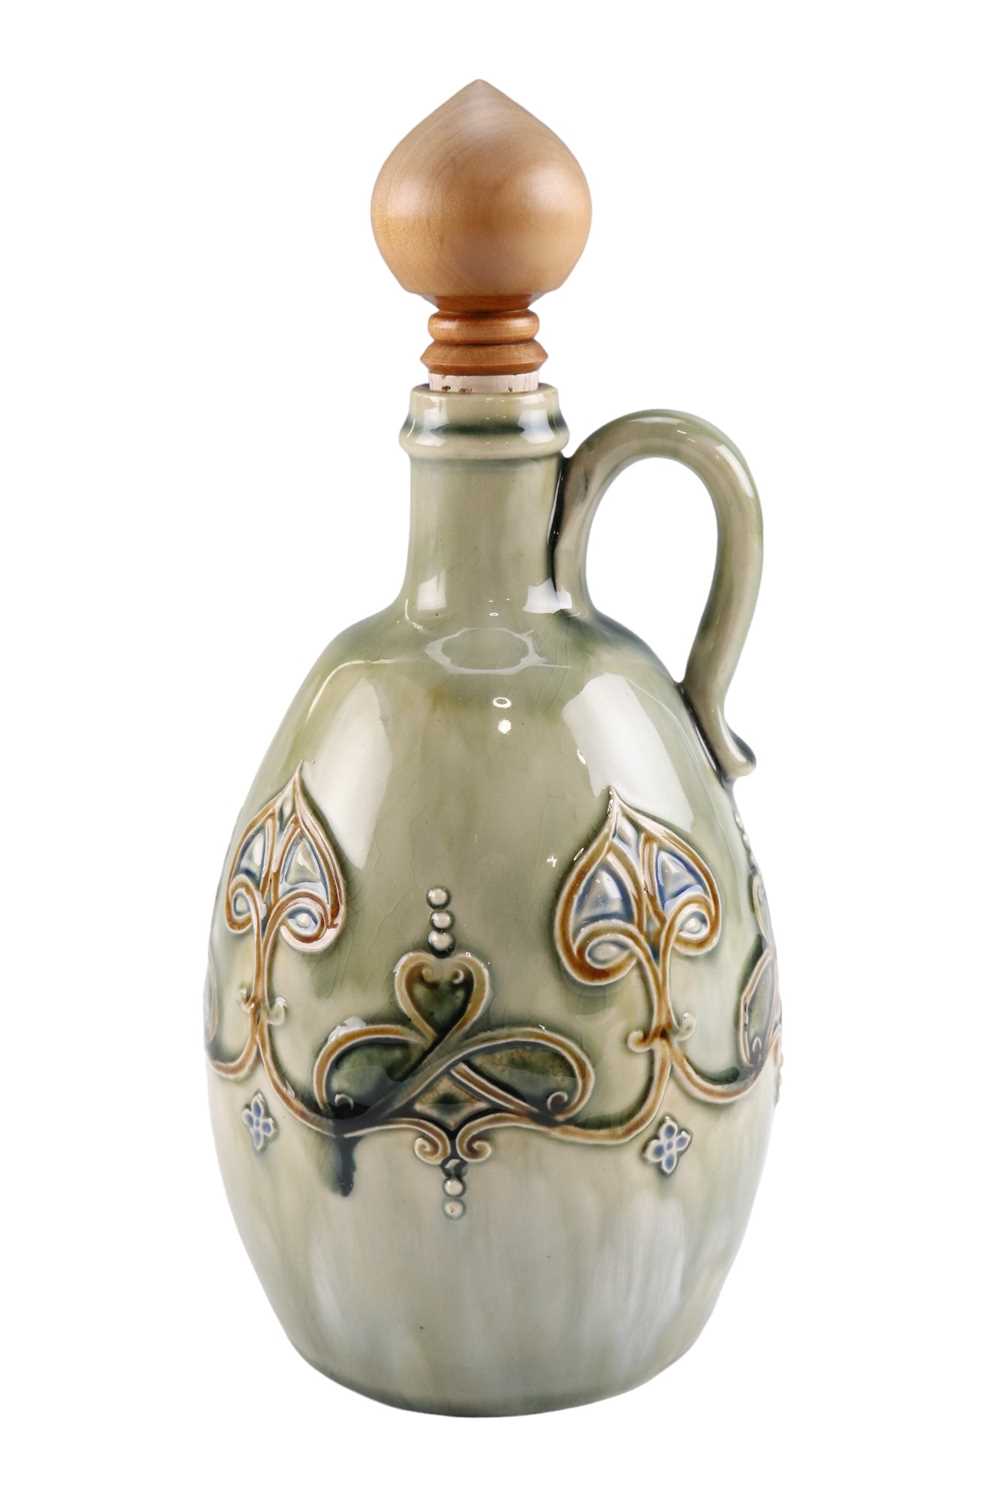 An early 20th Century Royal Doulton glazed earthenware flagon with later turned wood stopper, base